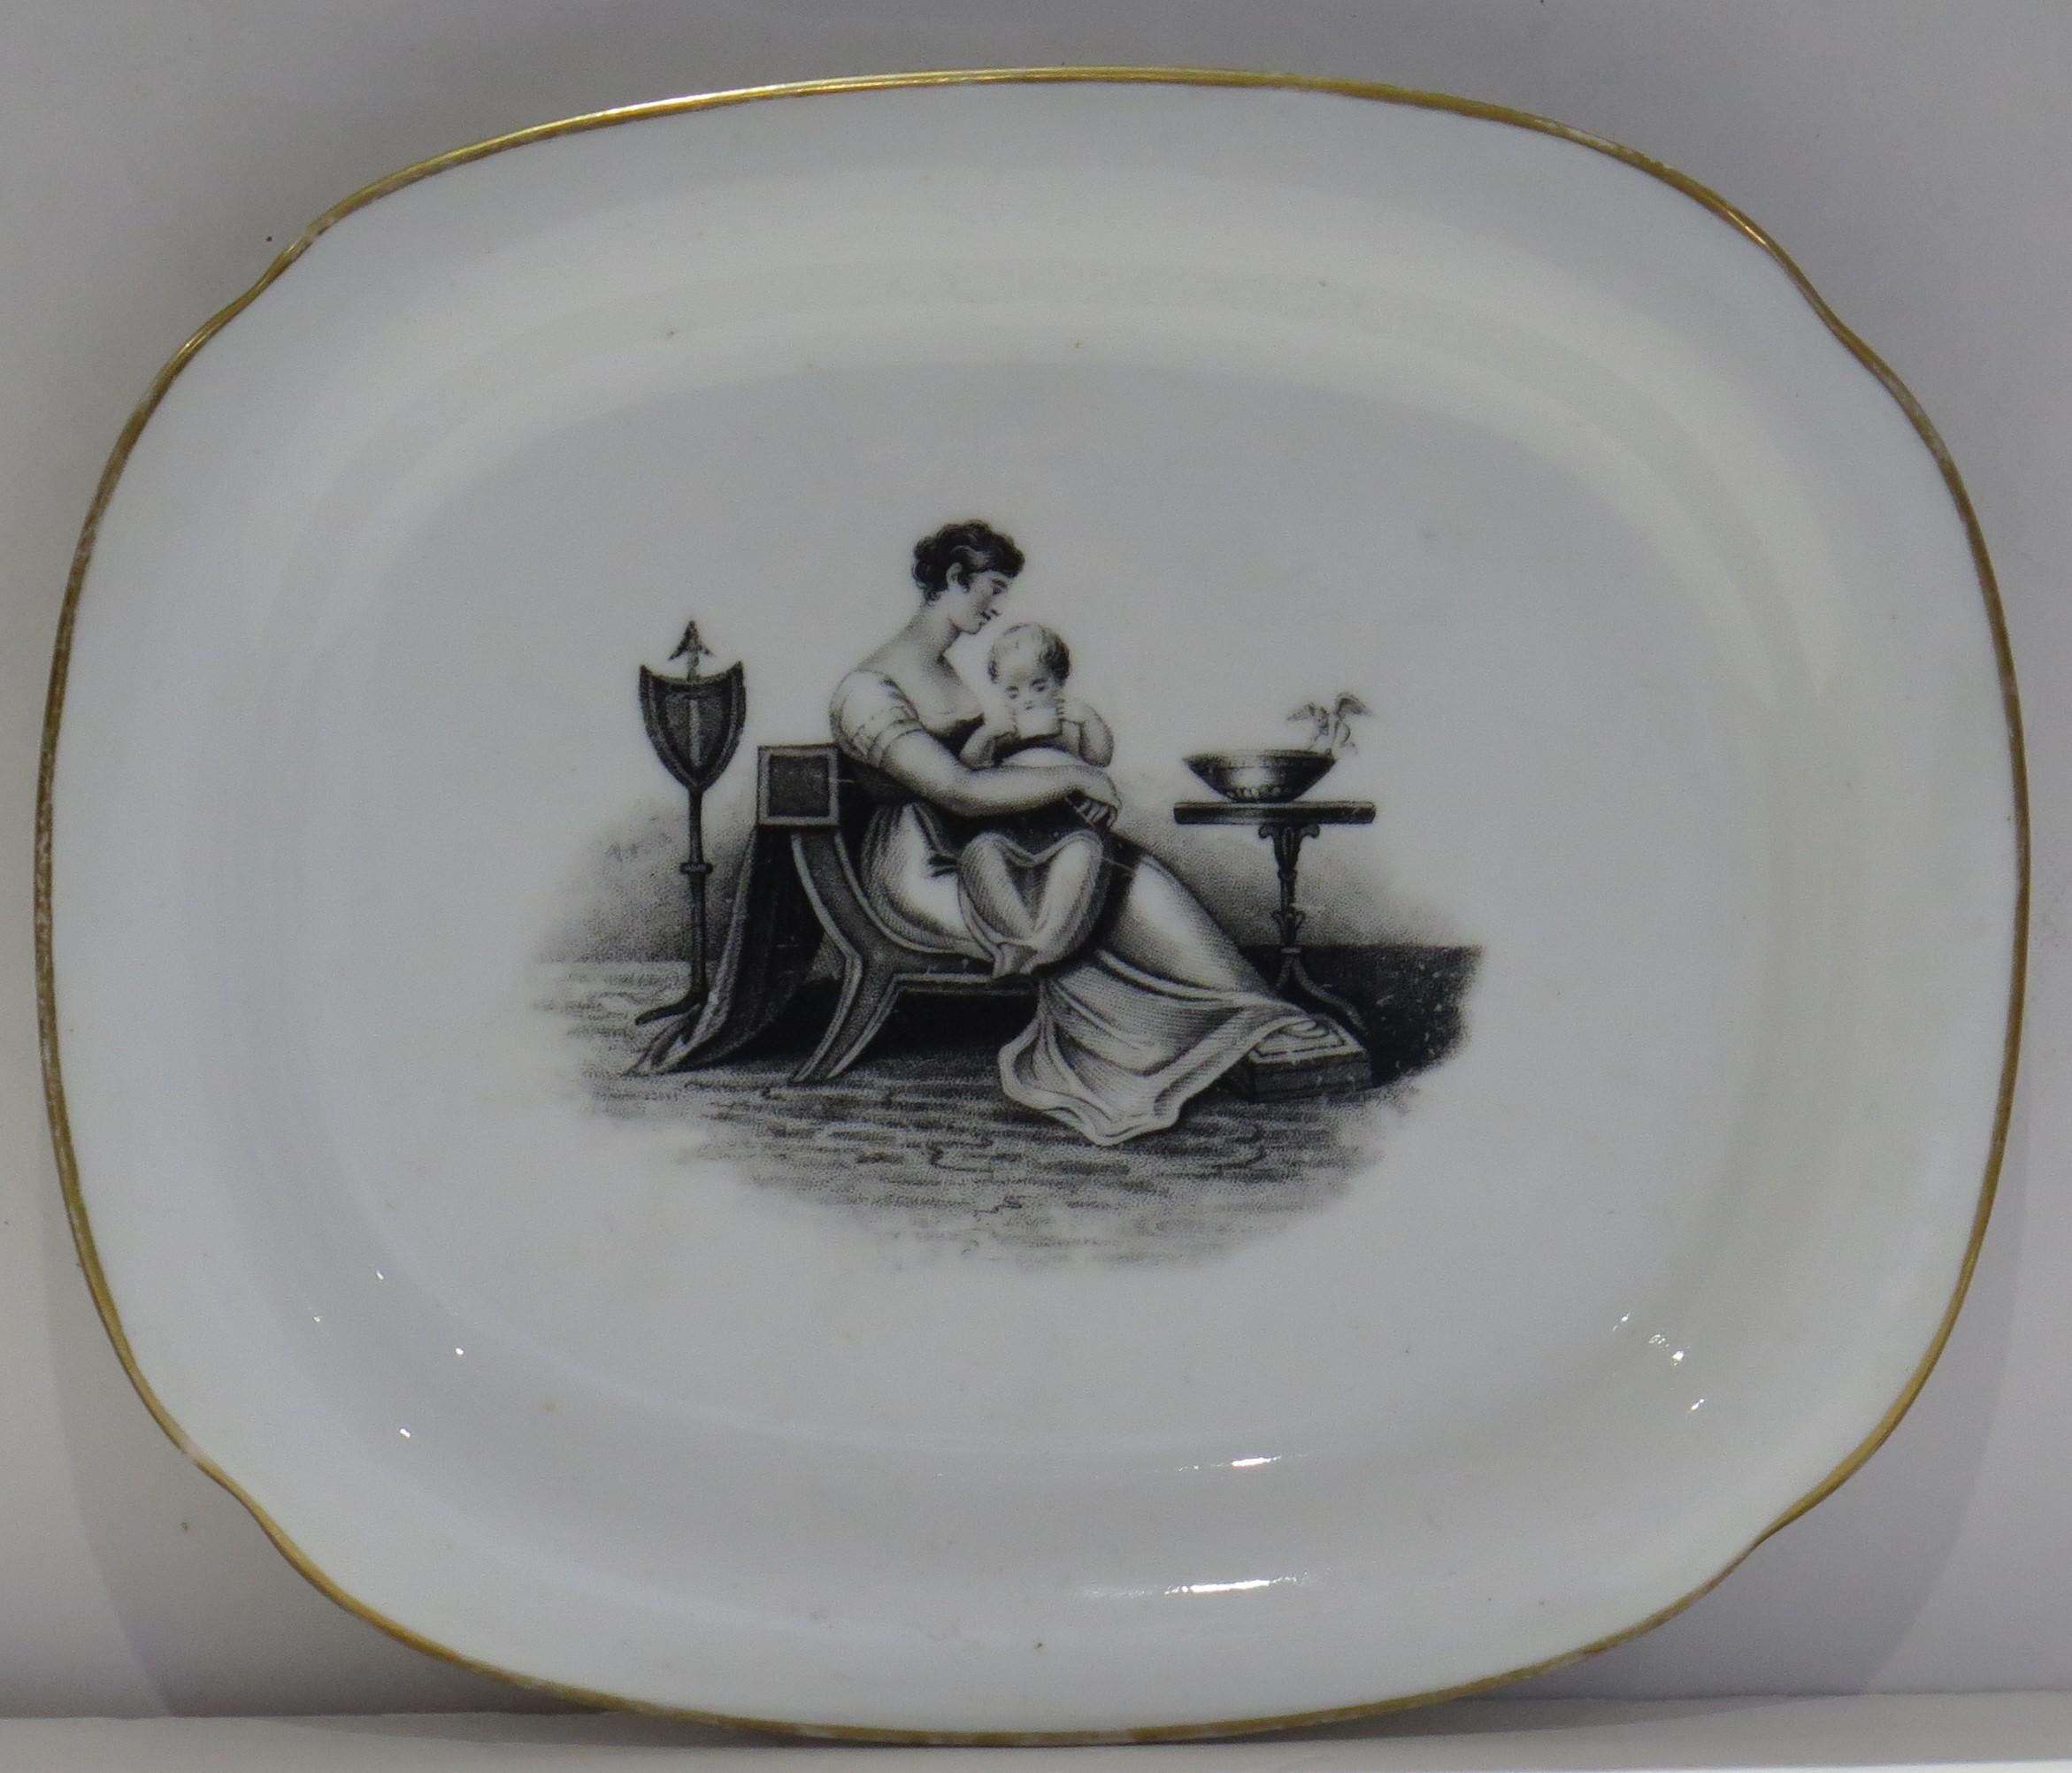 This is a bone china porcelain Dish or Stand by New Hall dating to the Georgian Regency period of the early 19th century, circa 1820.

The dish is well potted on a low foot. 

The decoration is bat printed in the manner of Adam Buck, with a